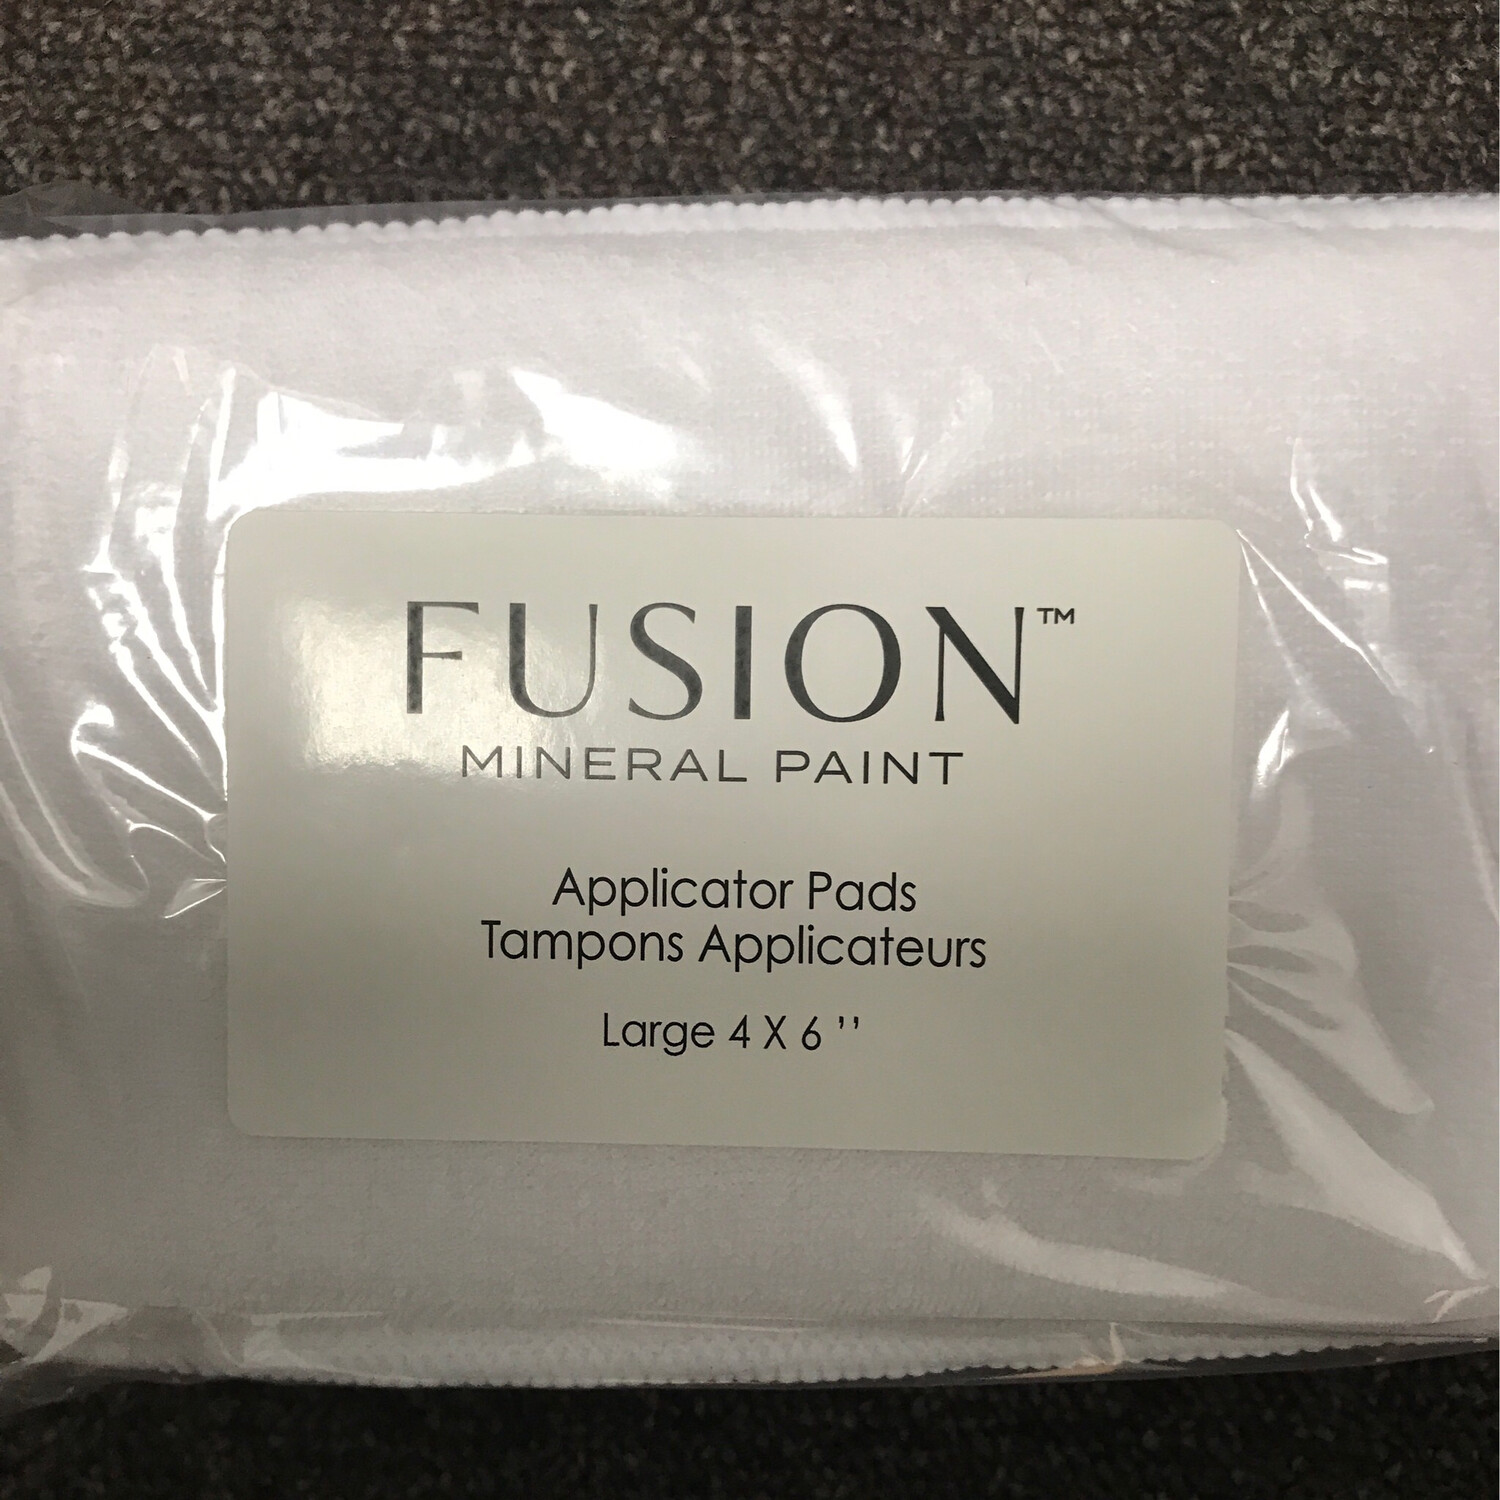 Fusion Applicator Pads 2pack